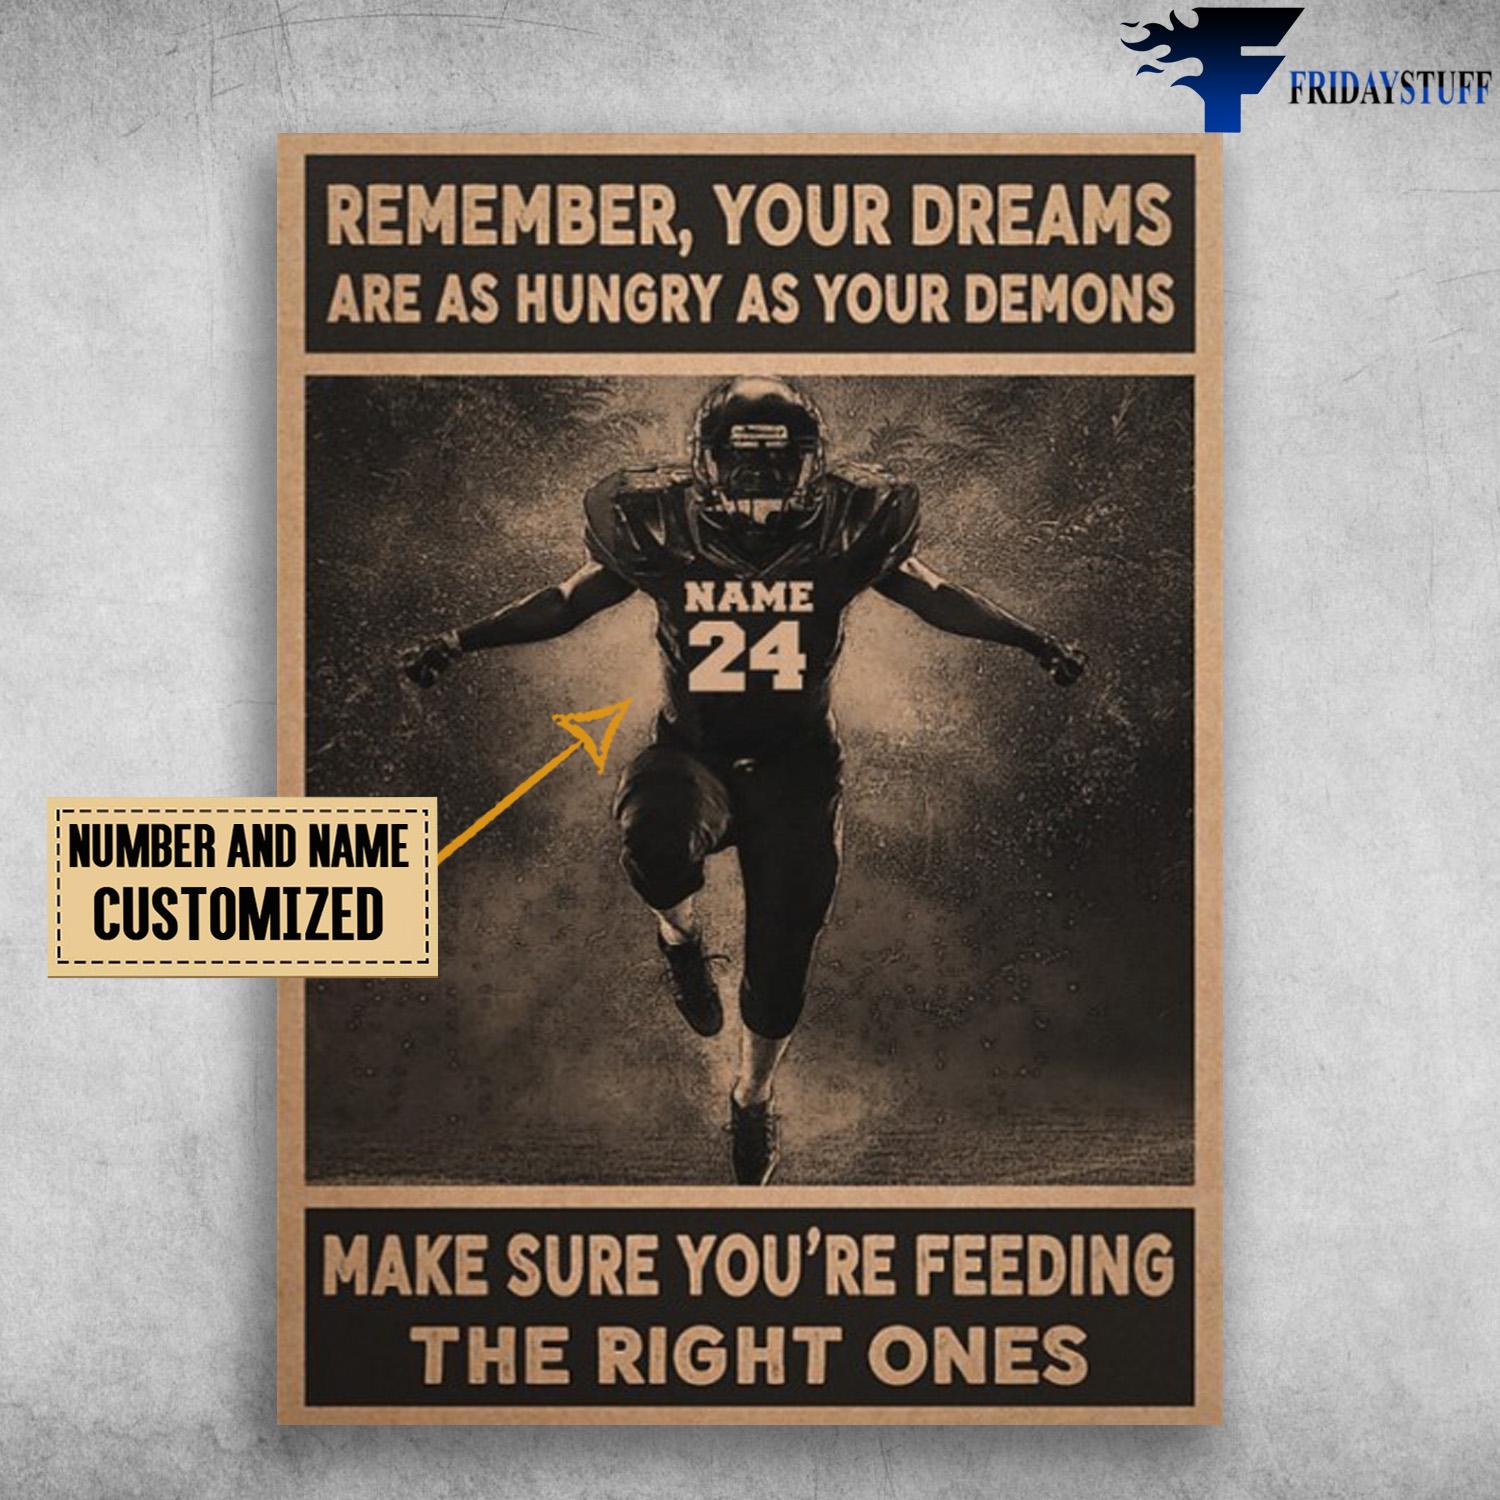 Rugby Player, Remember, Your Dreams, Are As Hungry As Your Demons, Make Sure You're Feeding, The Right Ones